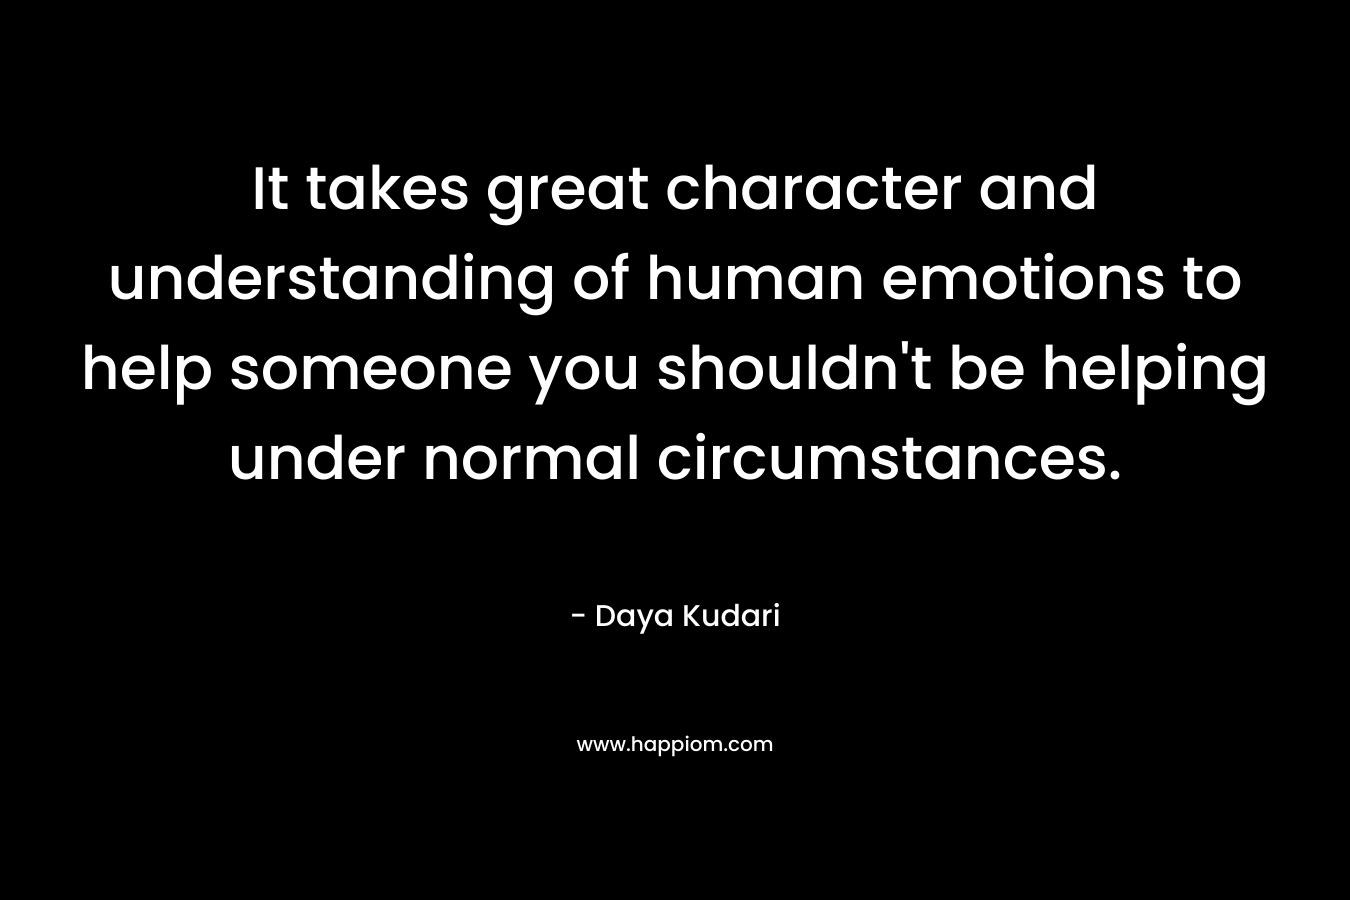 It takes great character and understanding of human emotions to help someone you shouldn’t be helping under normal circumstances. – Daya Kudari